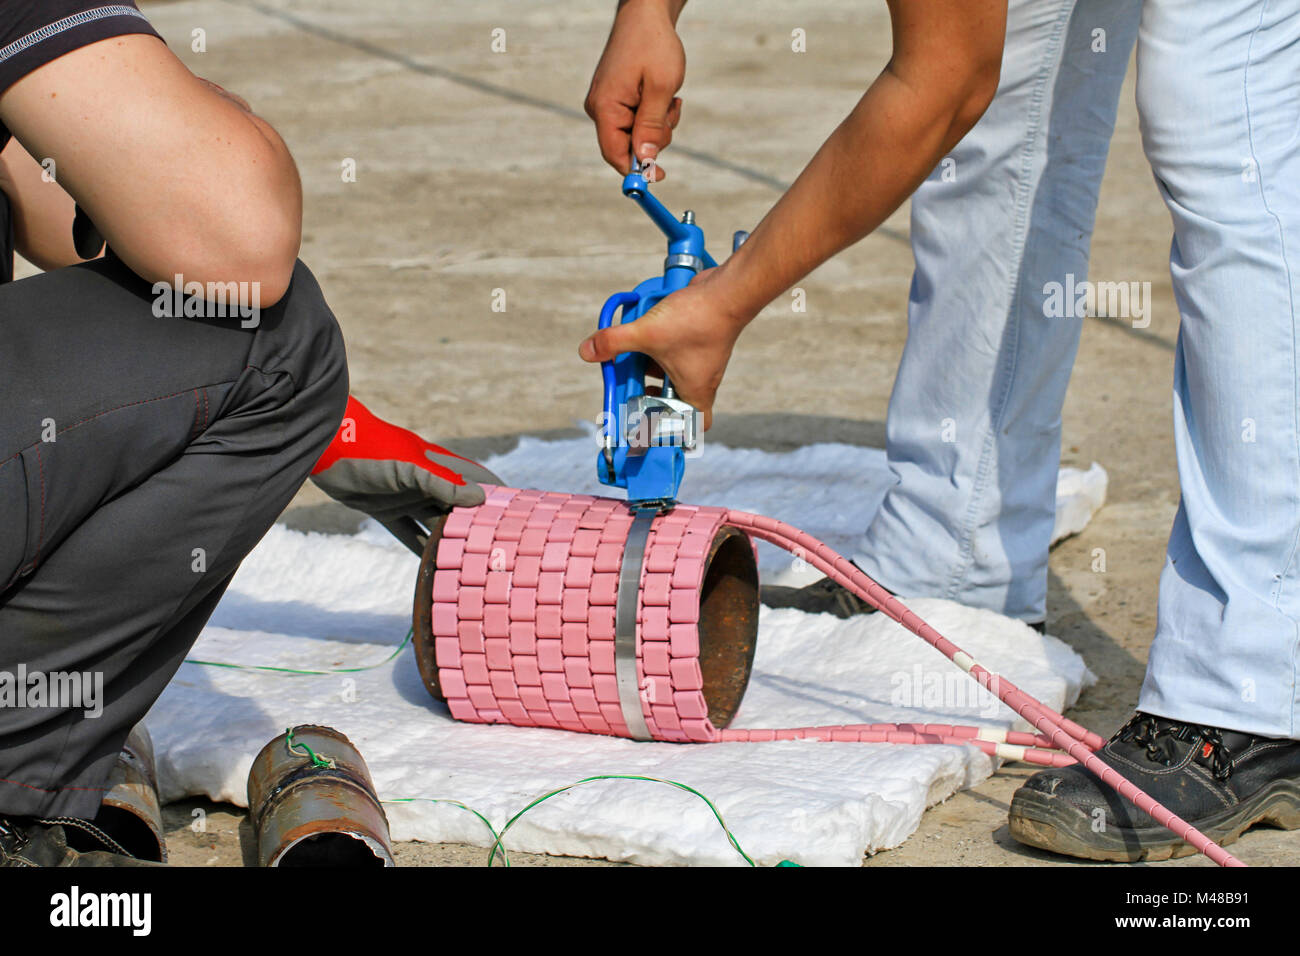 Preparation for conducting heat treatment on the weld Stock Photo